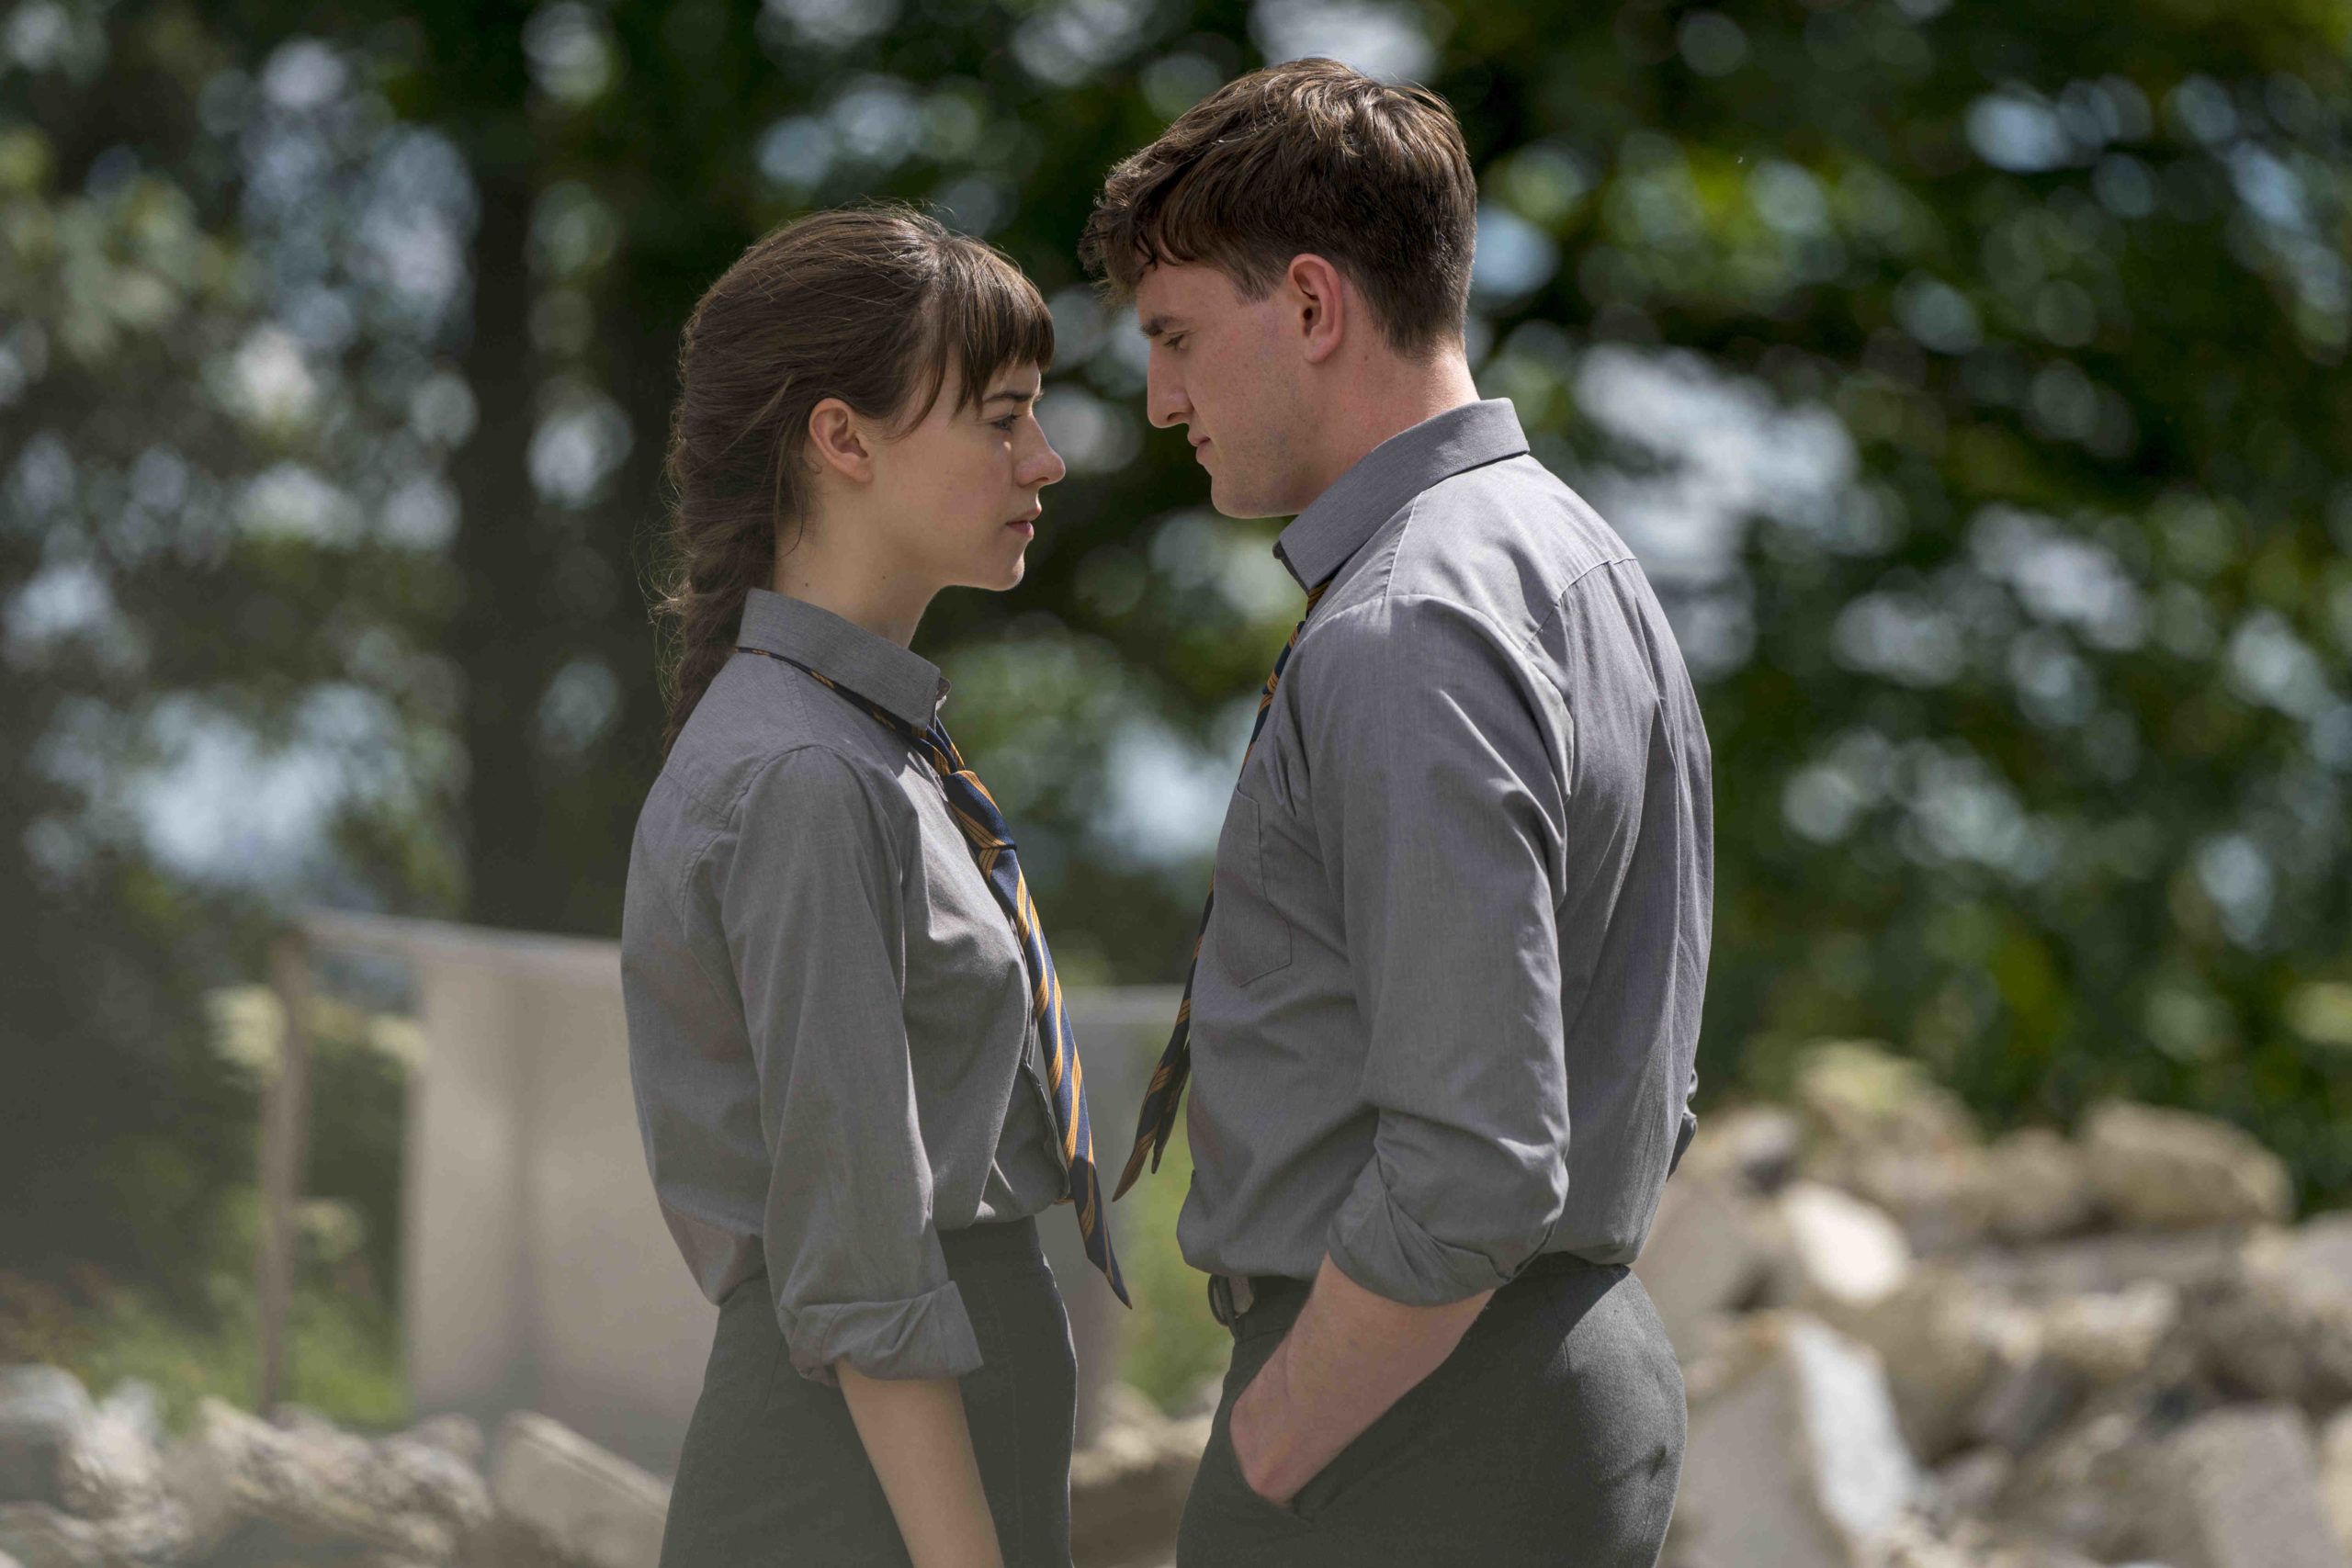 Connell and Marianne in Hulu’s adaptation of Sally Rooney’s novel “Normal People.”